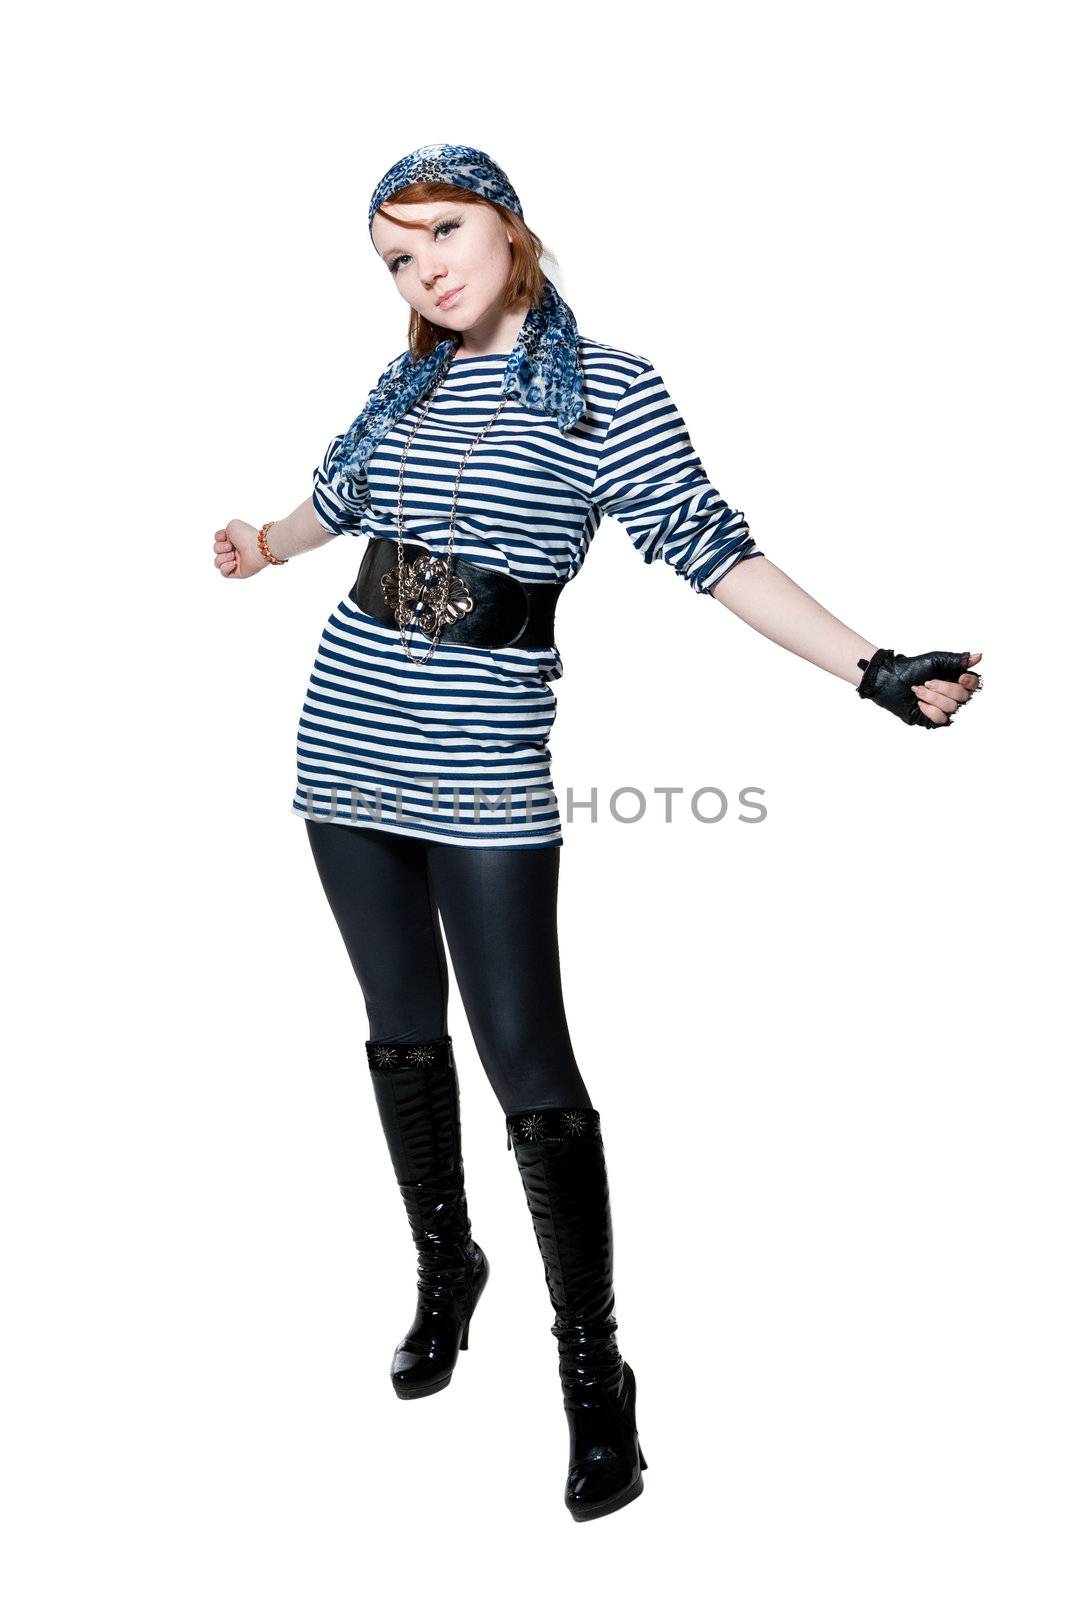 The beautiful girl dressed as the pirate isolated on white background